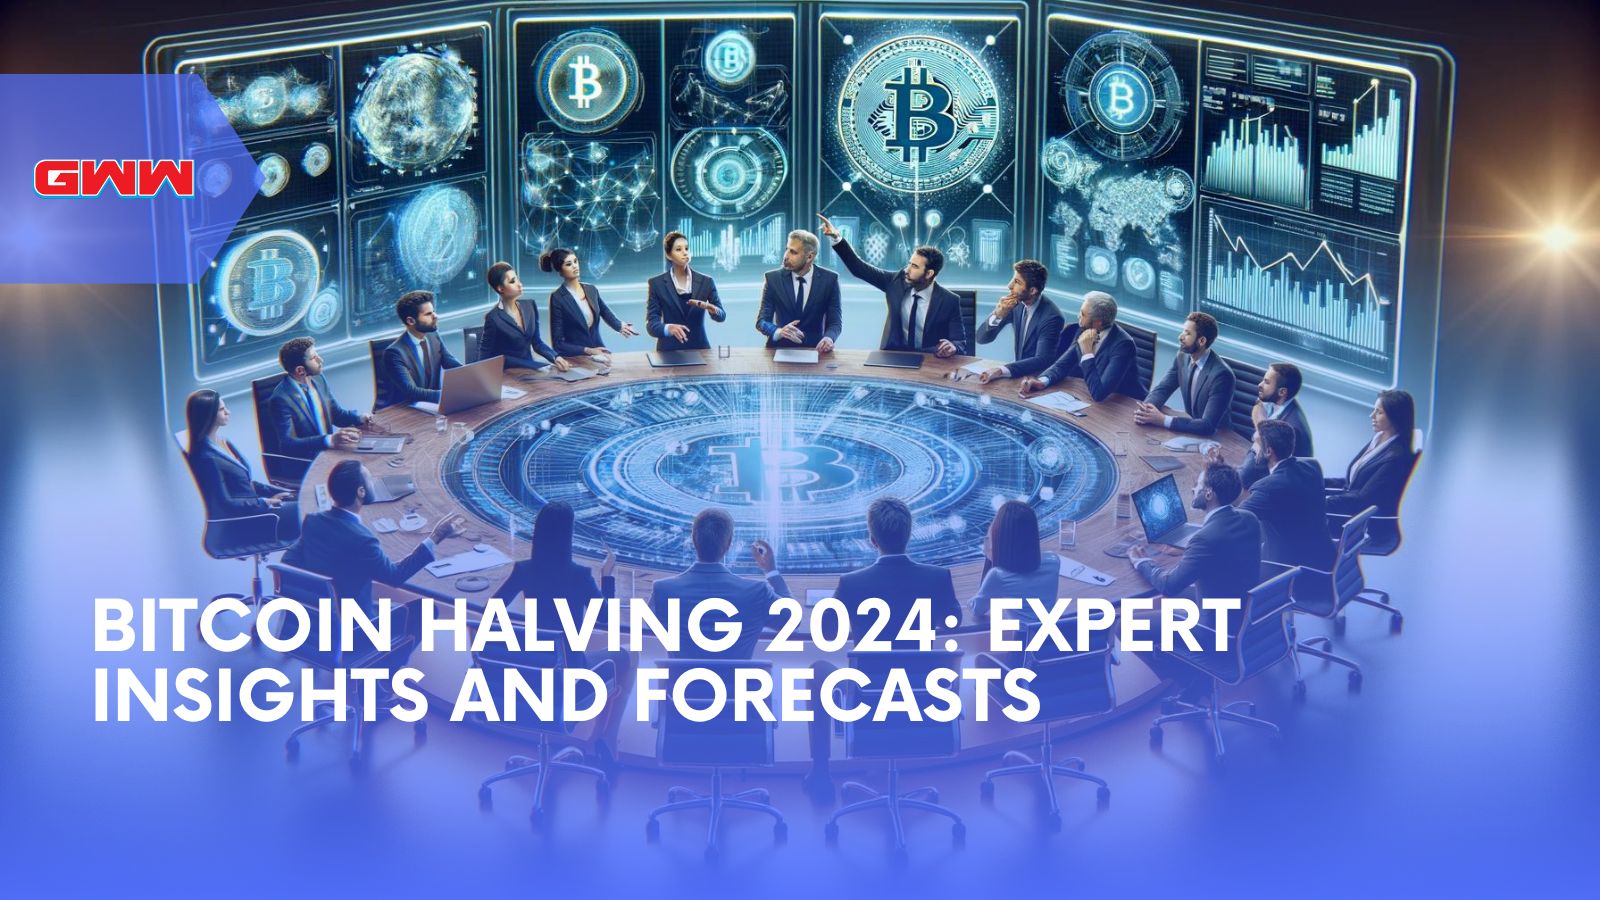 Bitcoin Halving 2024: Expert Insights and Forecasts